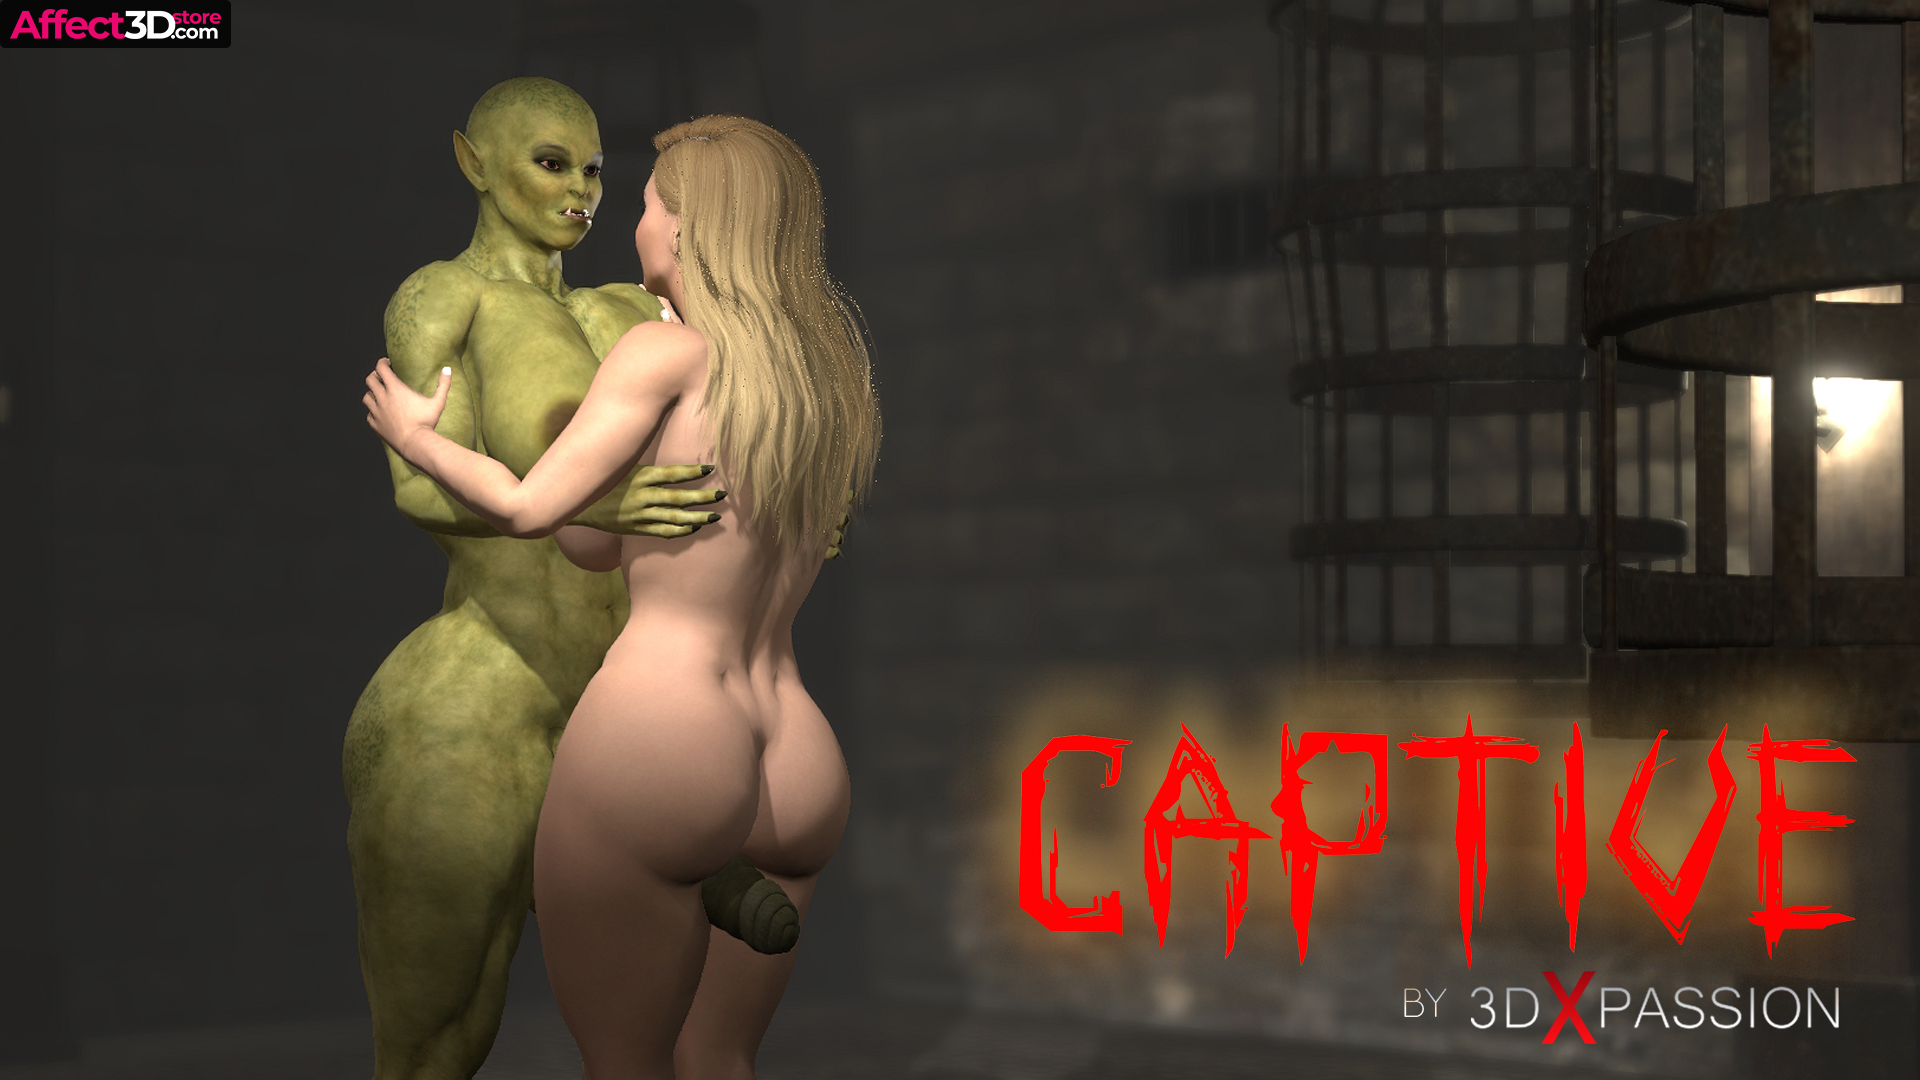 Captive - 3D futanari animation by 3DXPassion - futa Orc embracing busty blonde before having some naughty fun